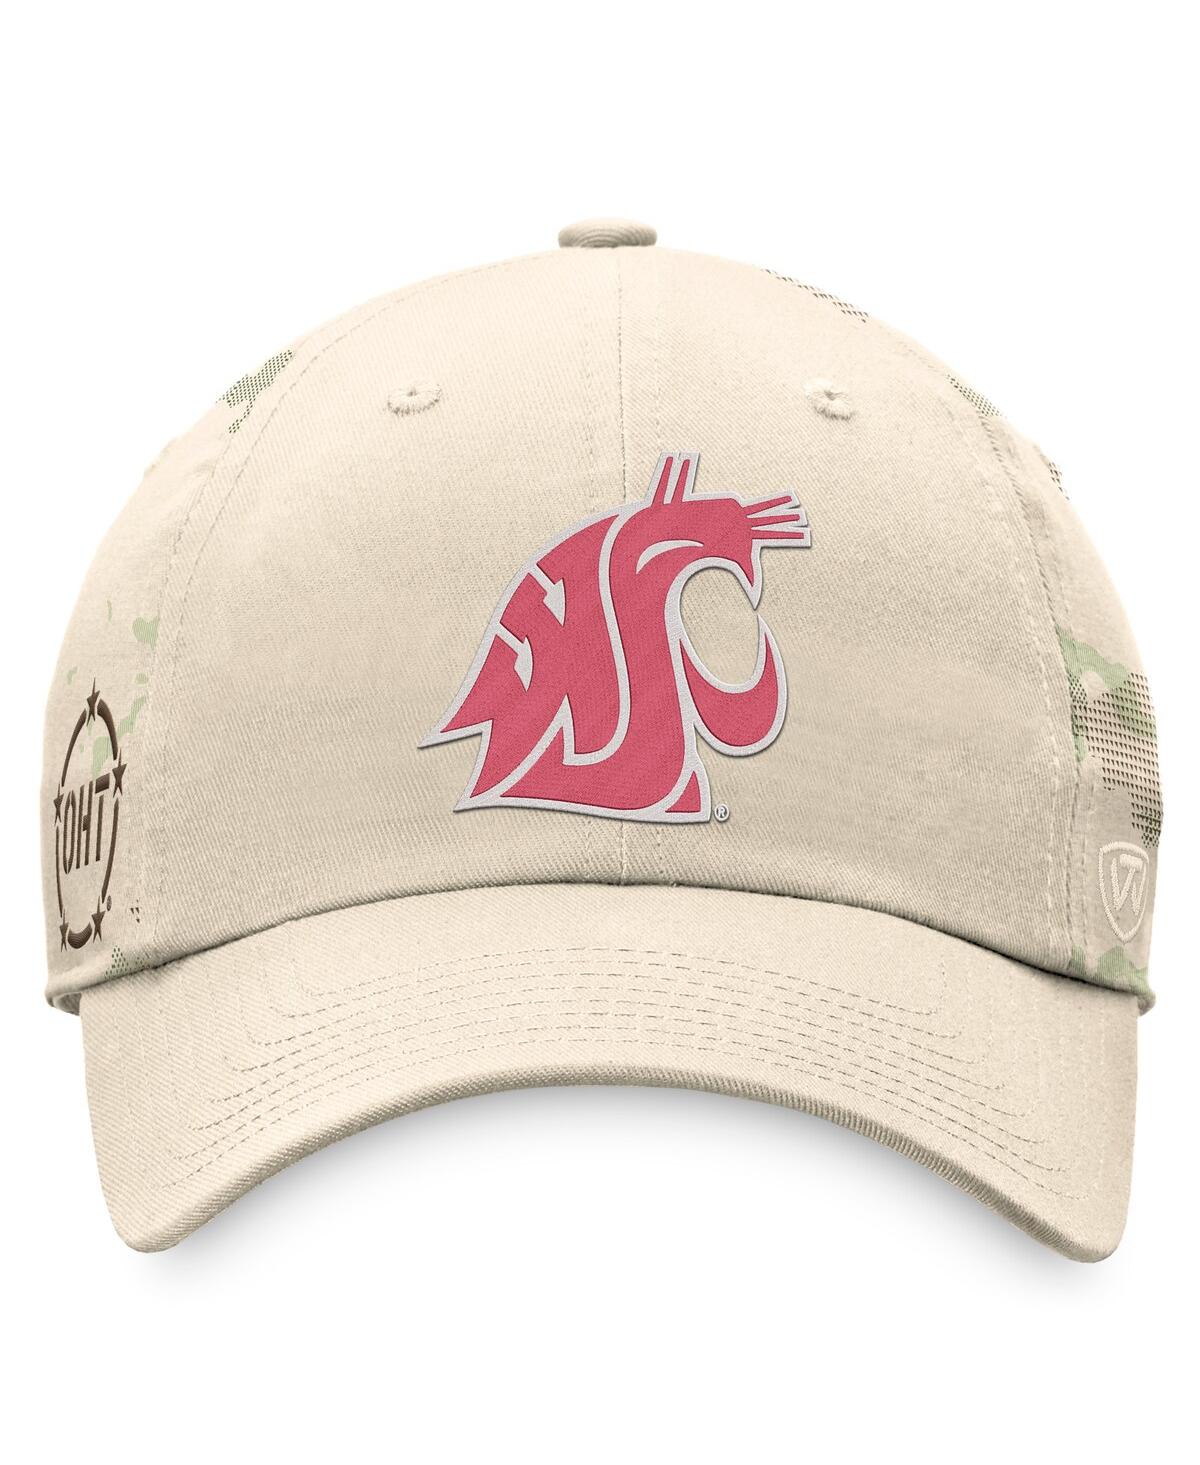 Shop Top Of The World Men's  Khaki Washington State Cougars Oht Military-inspired Appreciation Camo Dune A